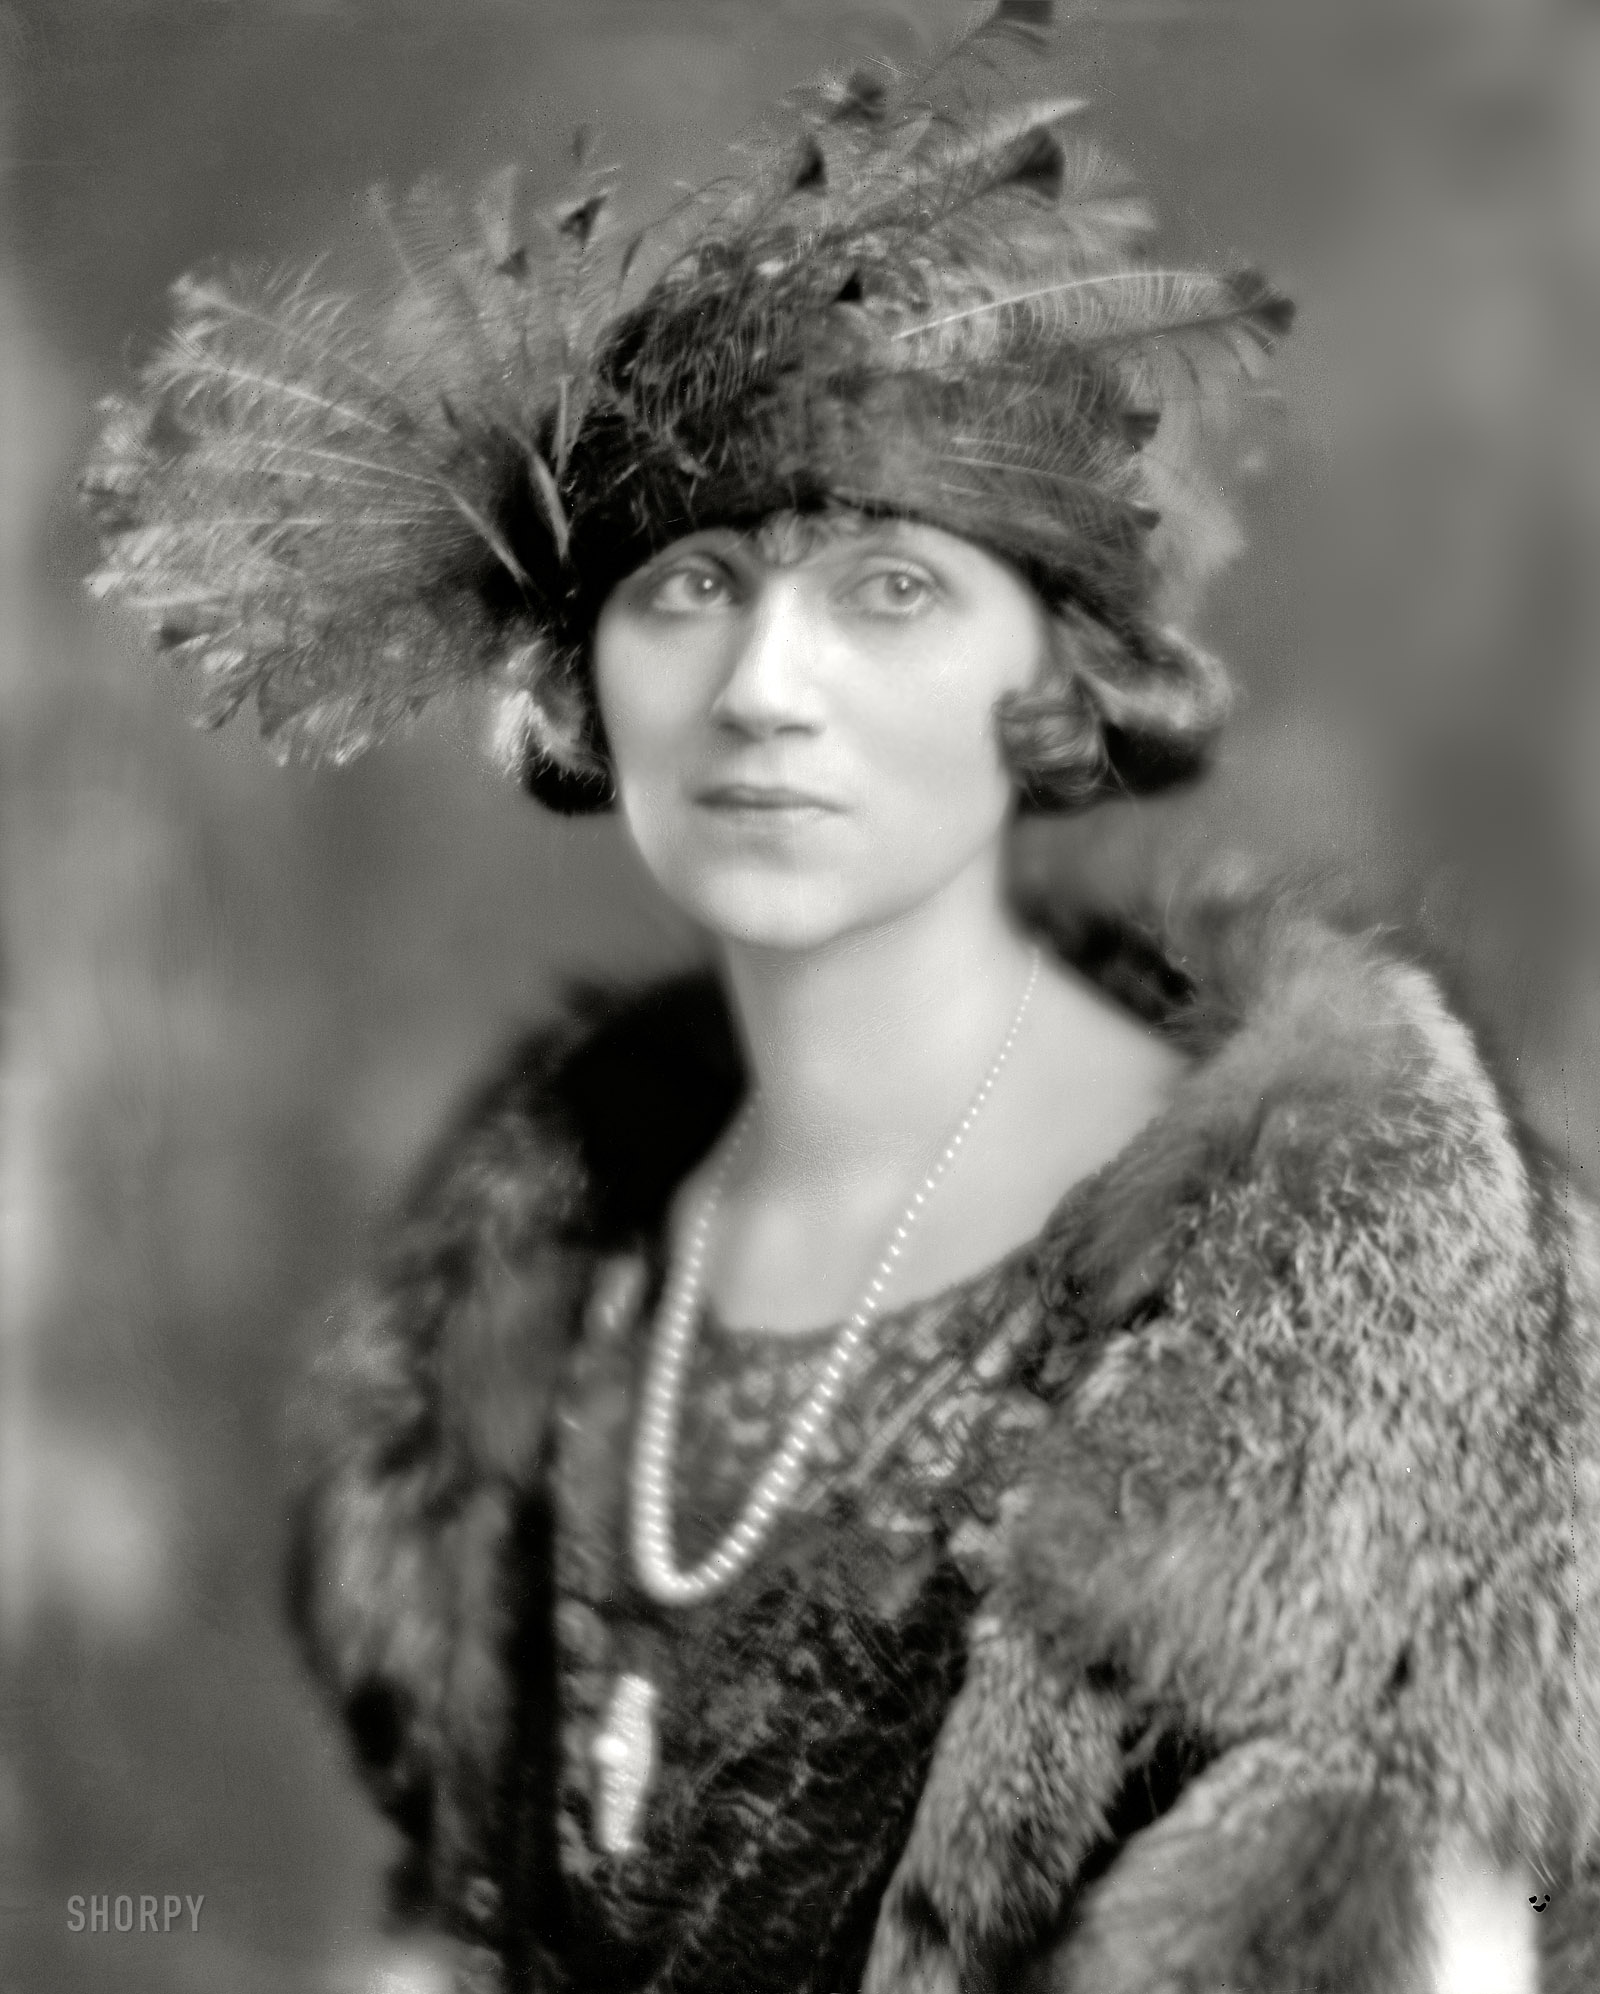 Washington, D.C., circa 1920. "Miss Helen LeSeure." Granddaughter of "Uncle Joe" Cannon, a legendary Speaker of the House. Harris & Ewing. View full size.